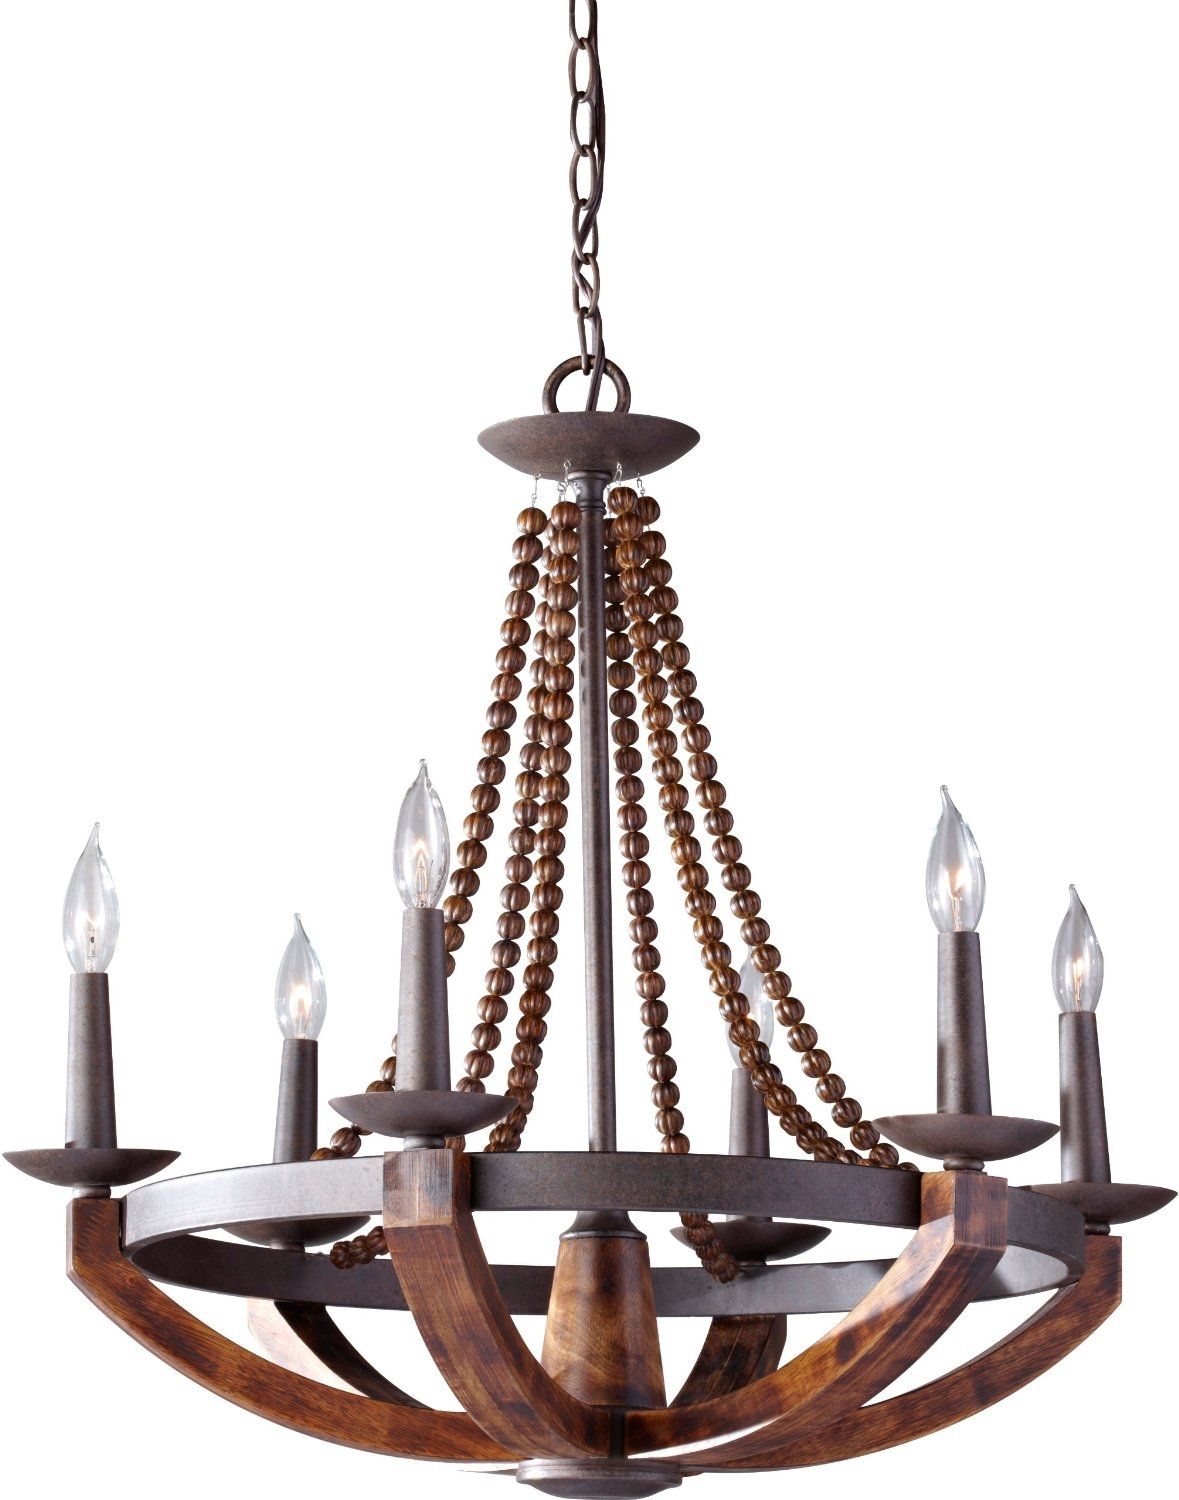 12 Best Rustic Wood And Metal Chandeliers Qosy Intended For Modern Wrought Iron Chandeliers (Photo 8 of 12)